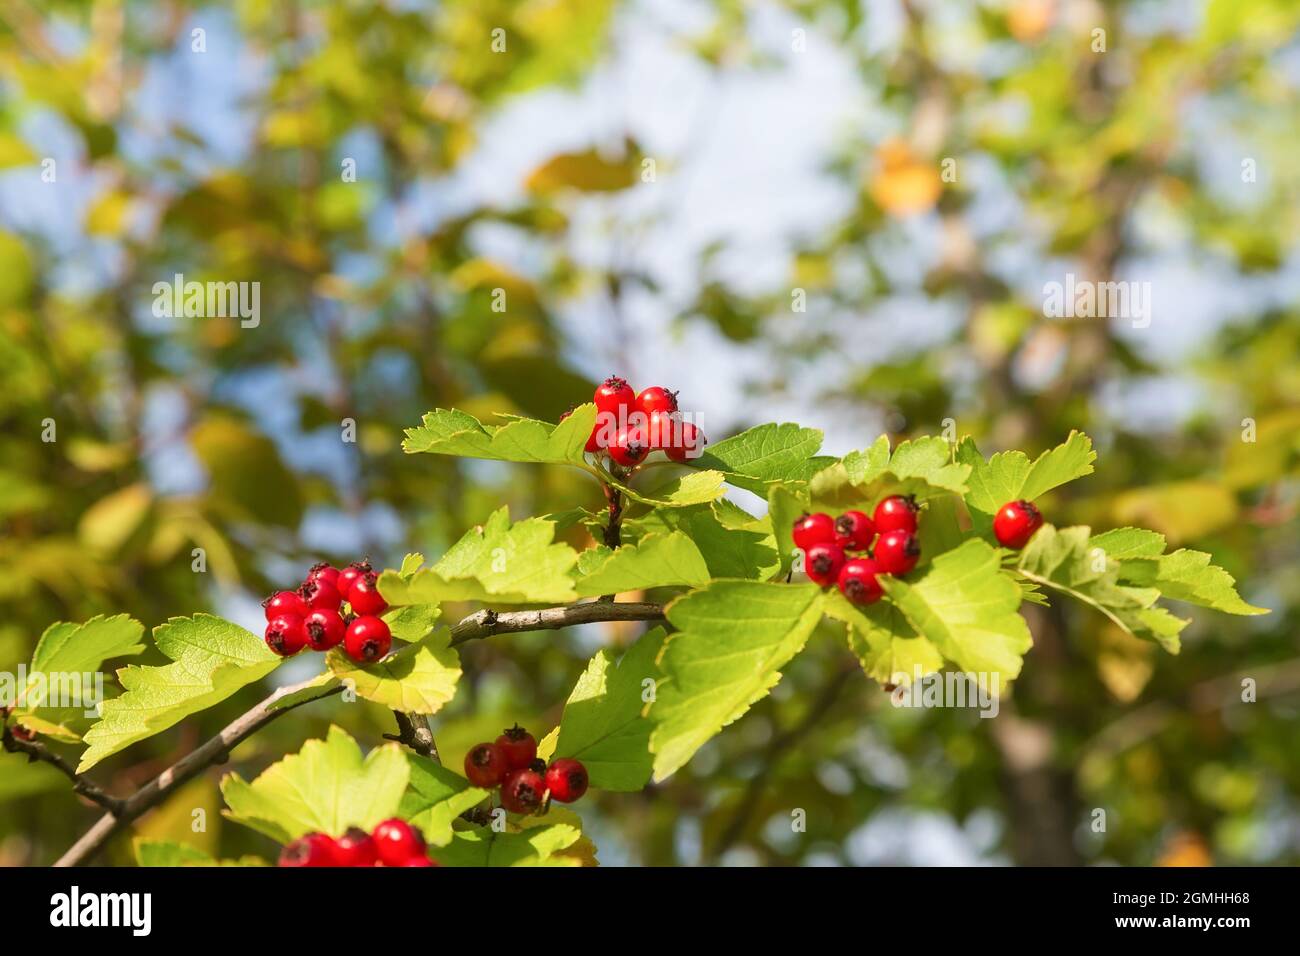 A branch of a hawthorn with ripe, red berries, on a soft background of foliage Stock Photo